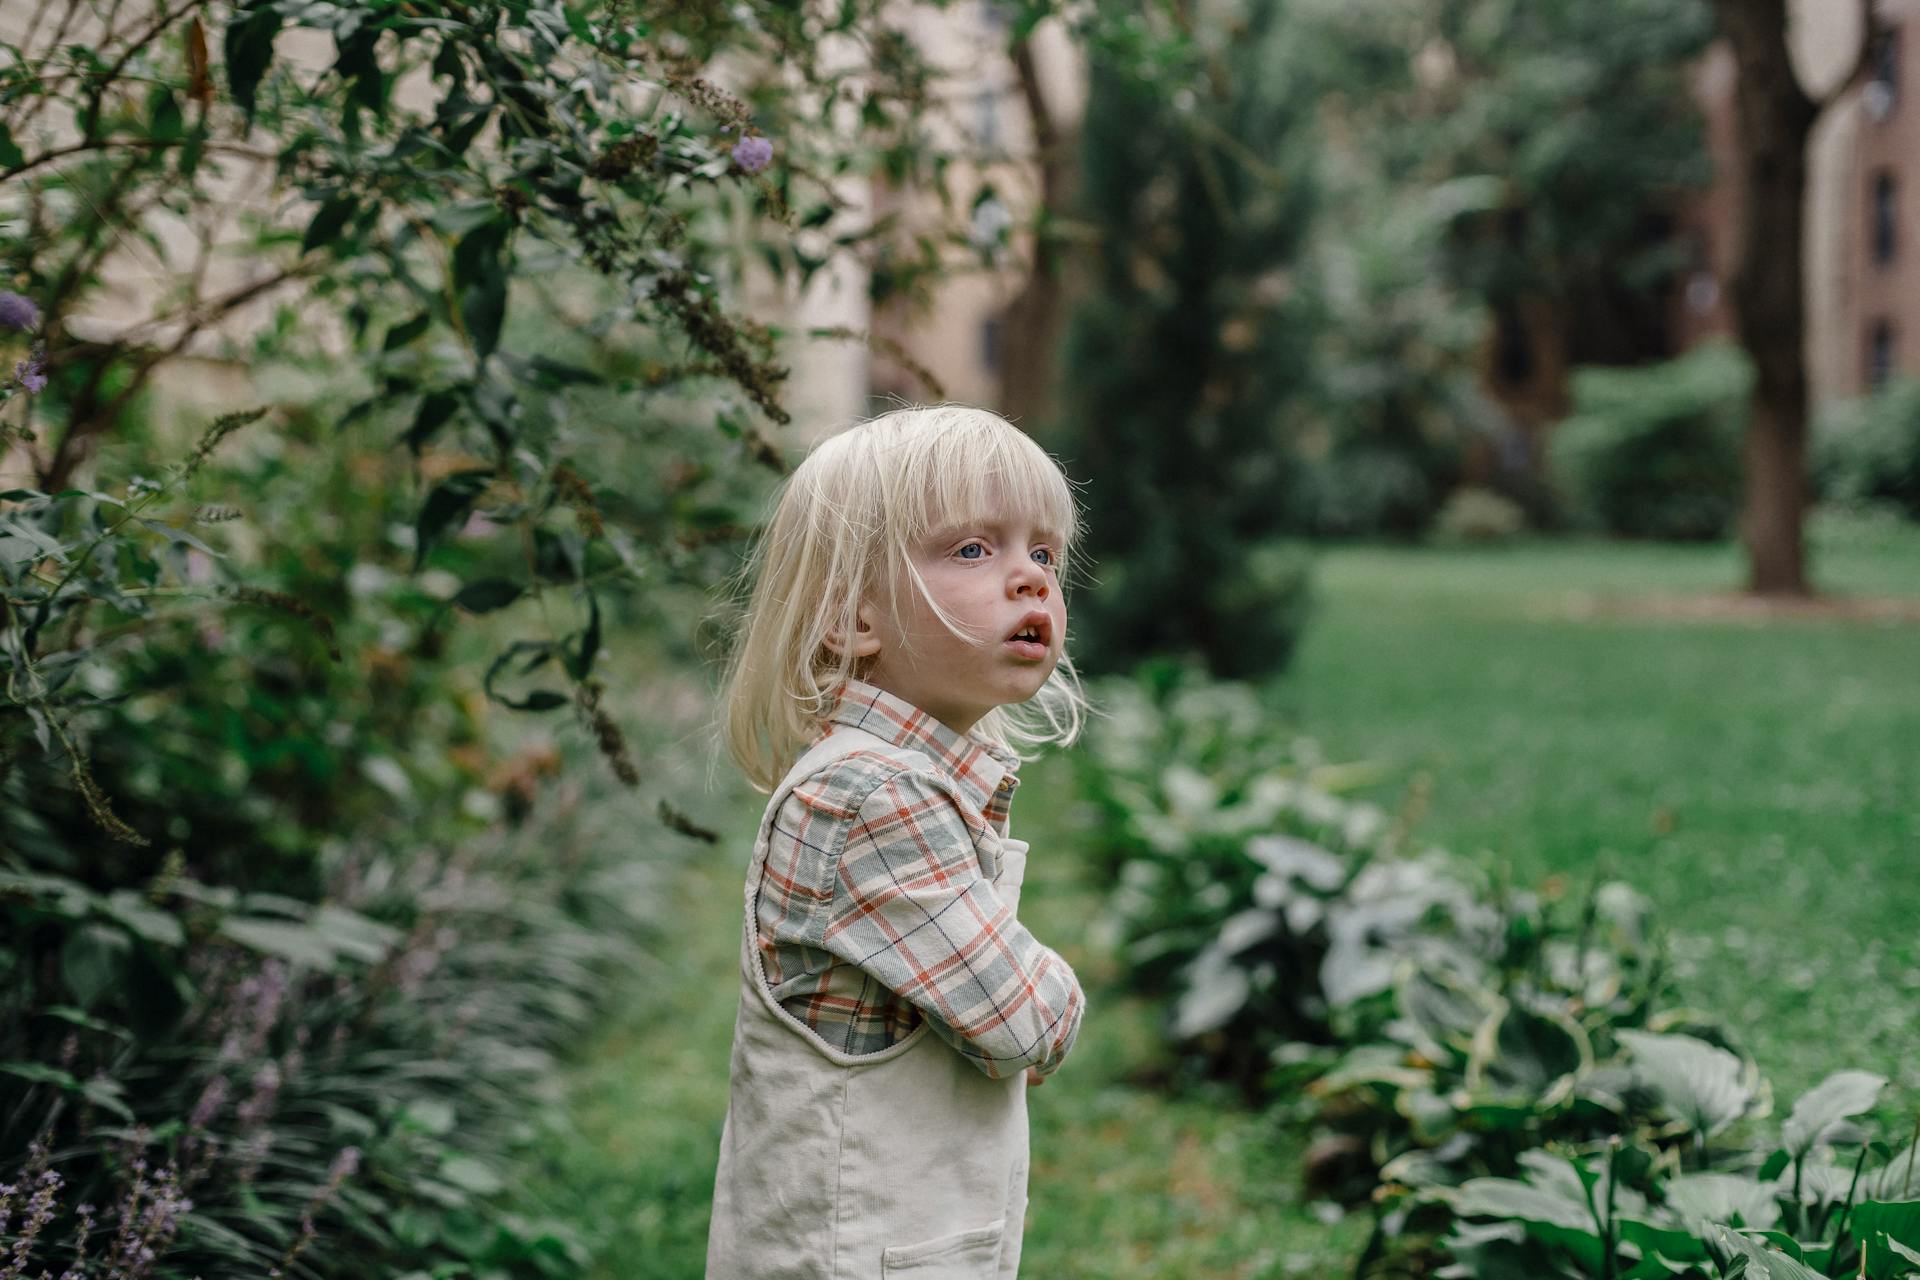 A child in a garden | Source: Pexels